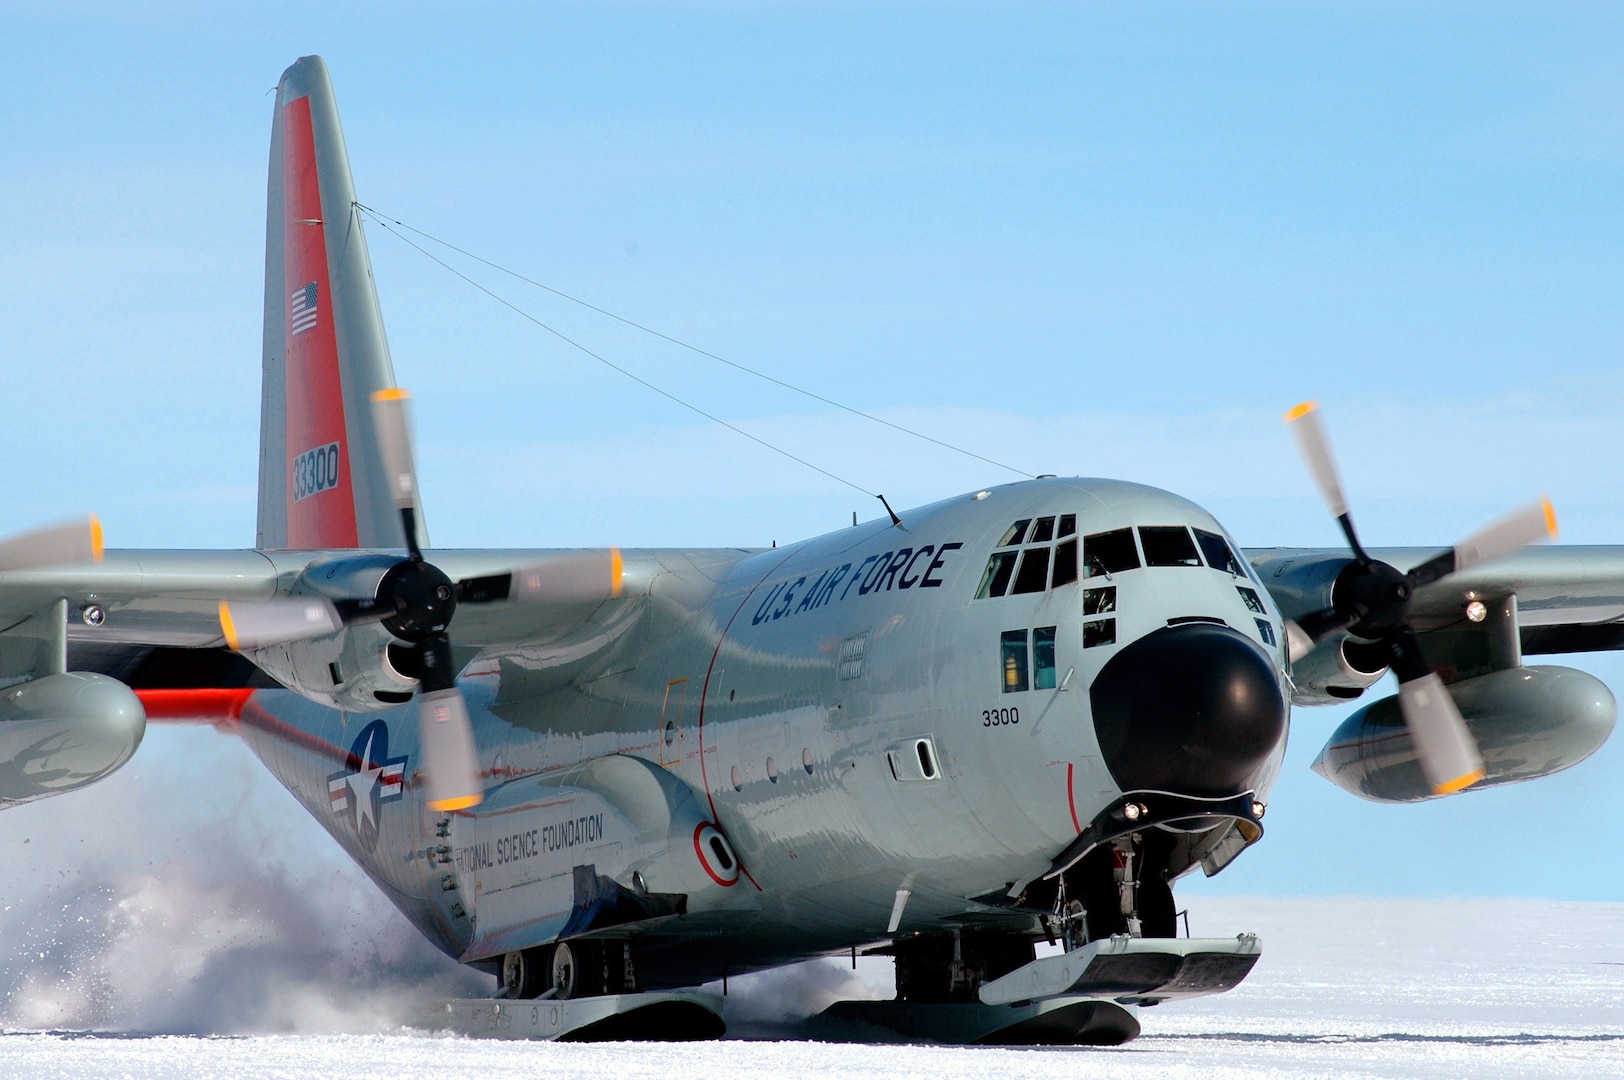 An LC-130 Hercules from the New York Air National Guard's 109th Airlift Wing takes off on the Greenland ice cap during a mission in September 2008. The 109th AW is the only organization in the U.S. military that flies the ski-equipped LC-130 aircraft.